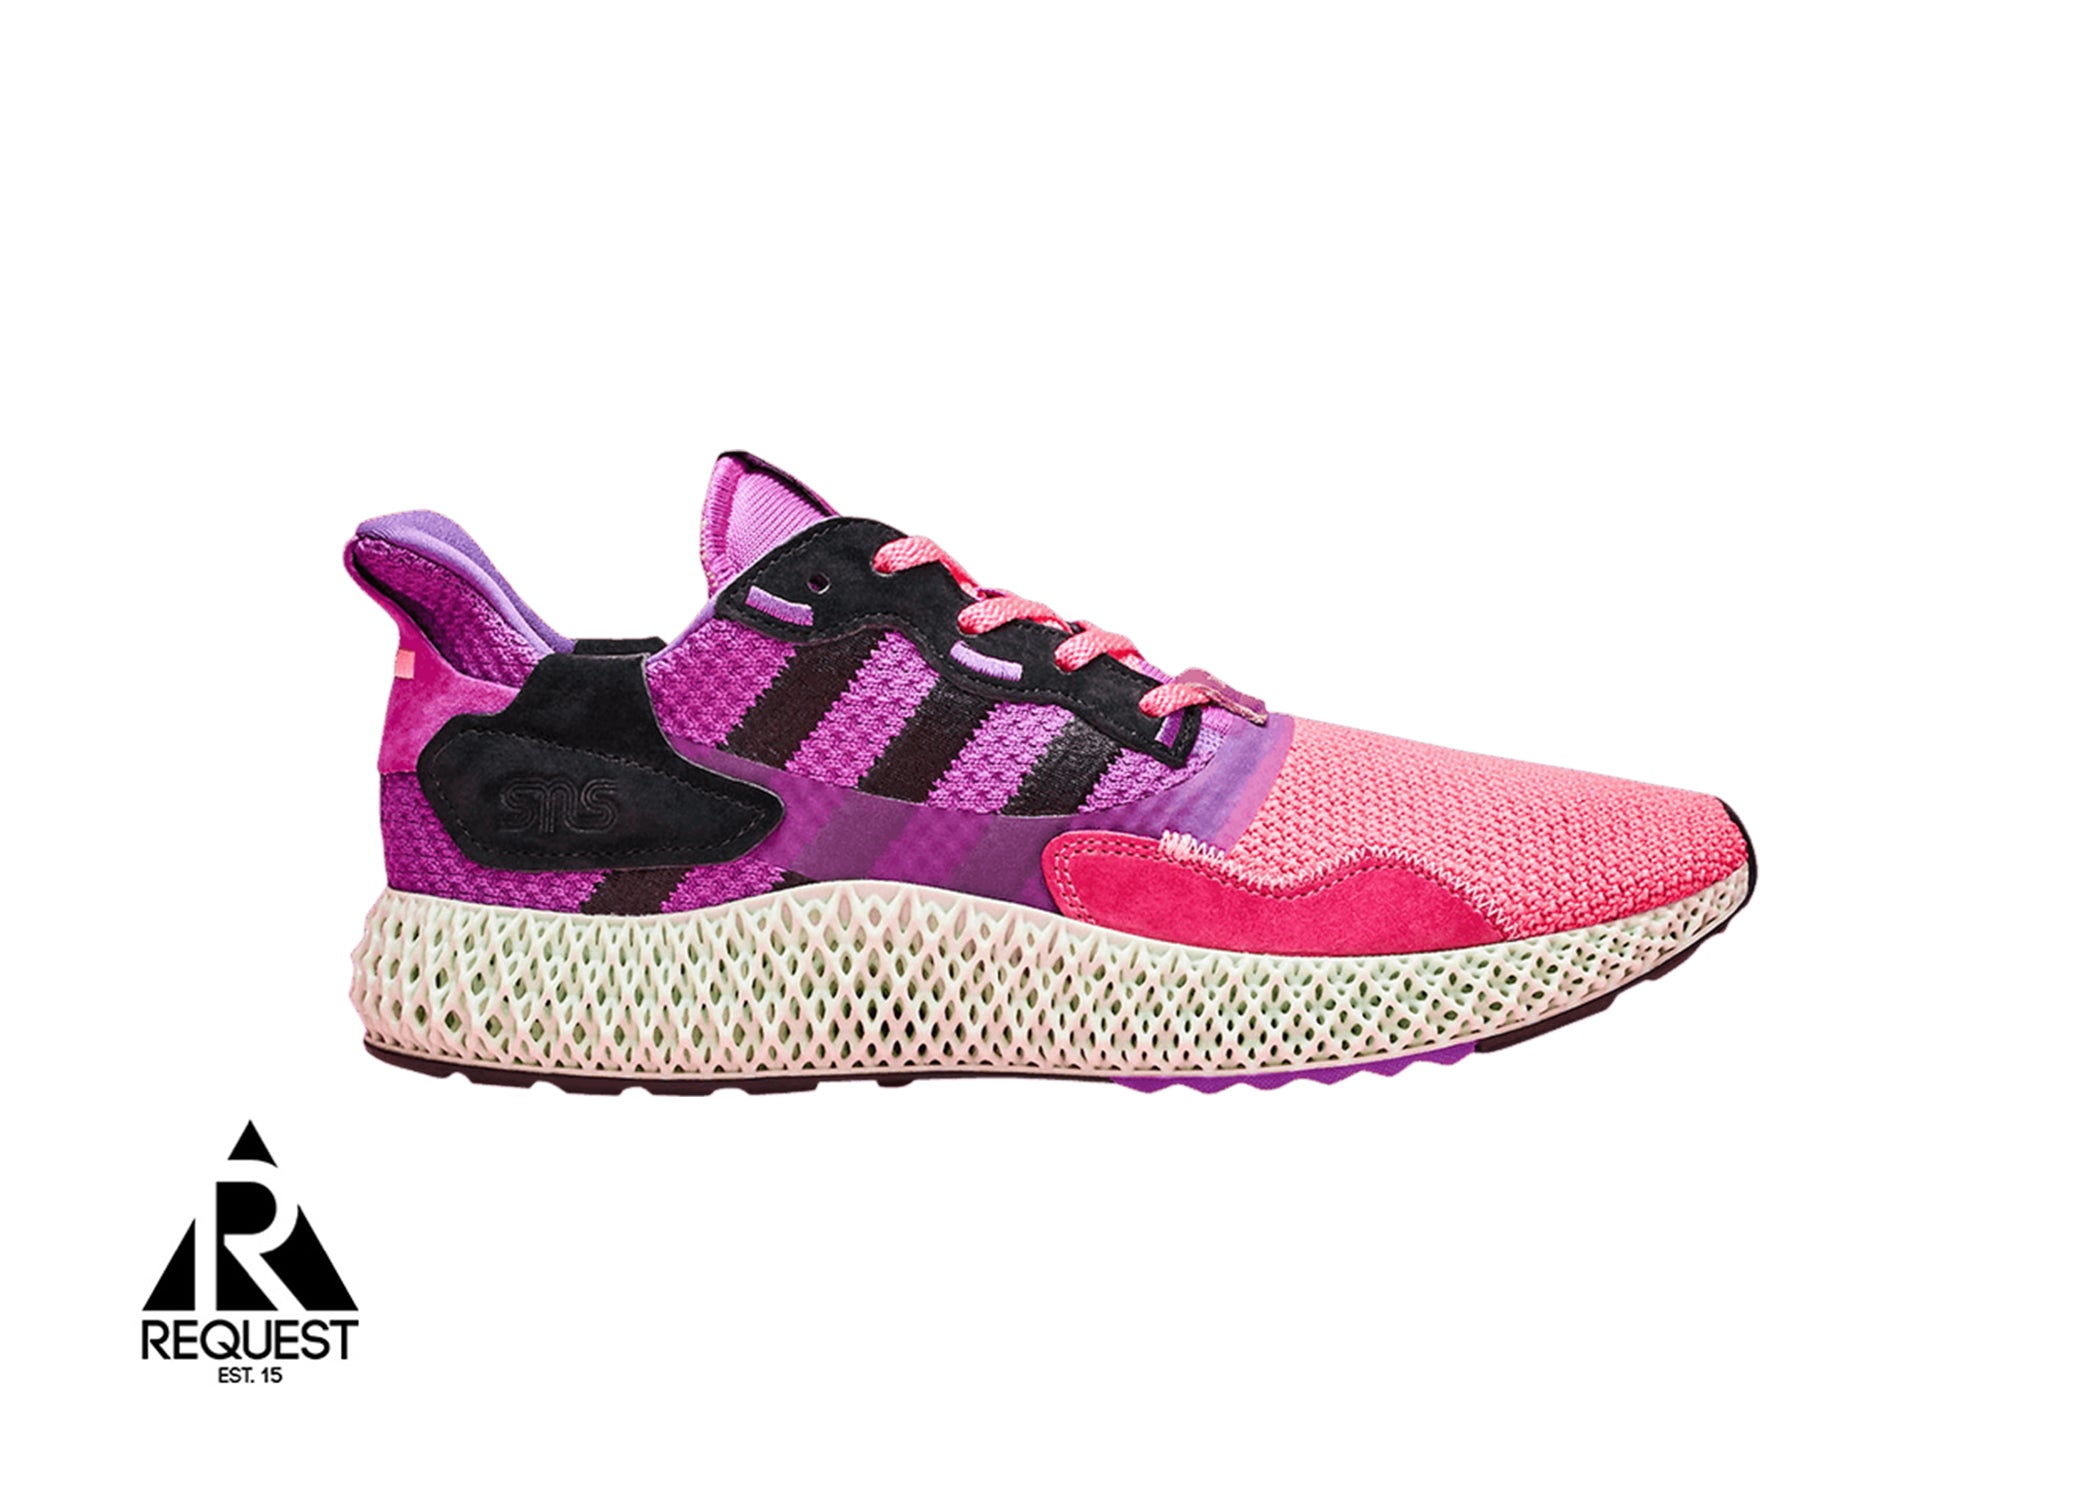 Adidas ZX 4000 4D “SNS Los Angeles | Request